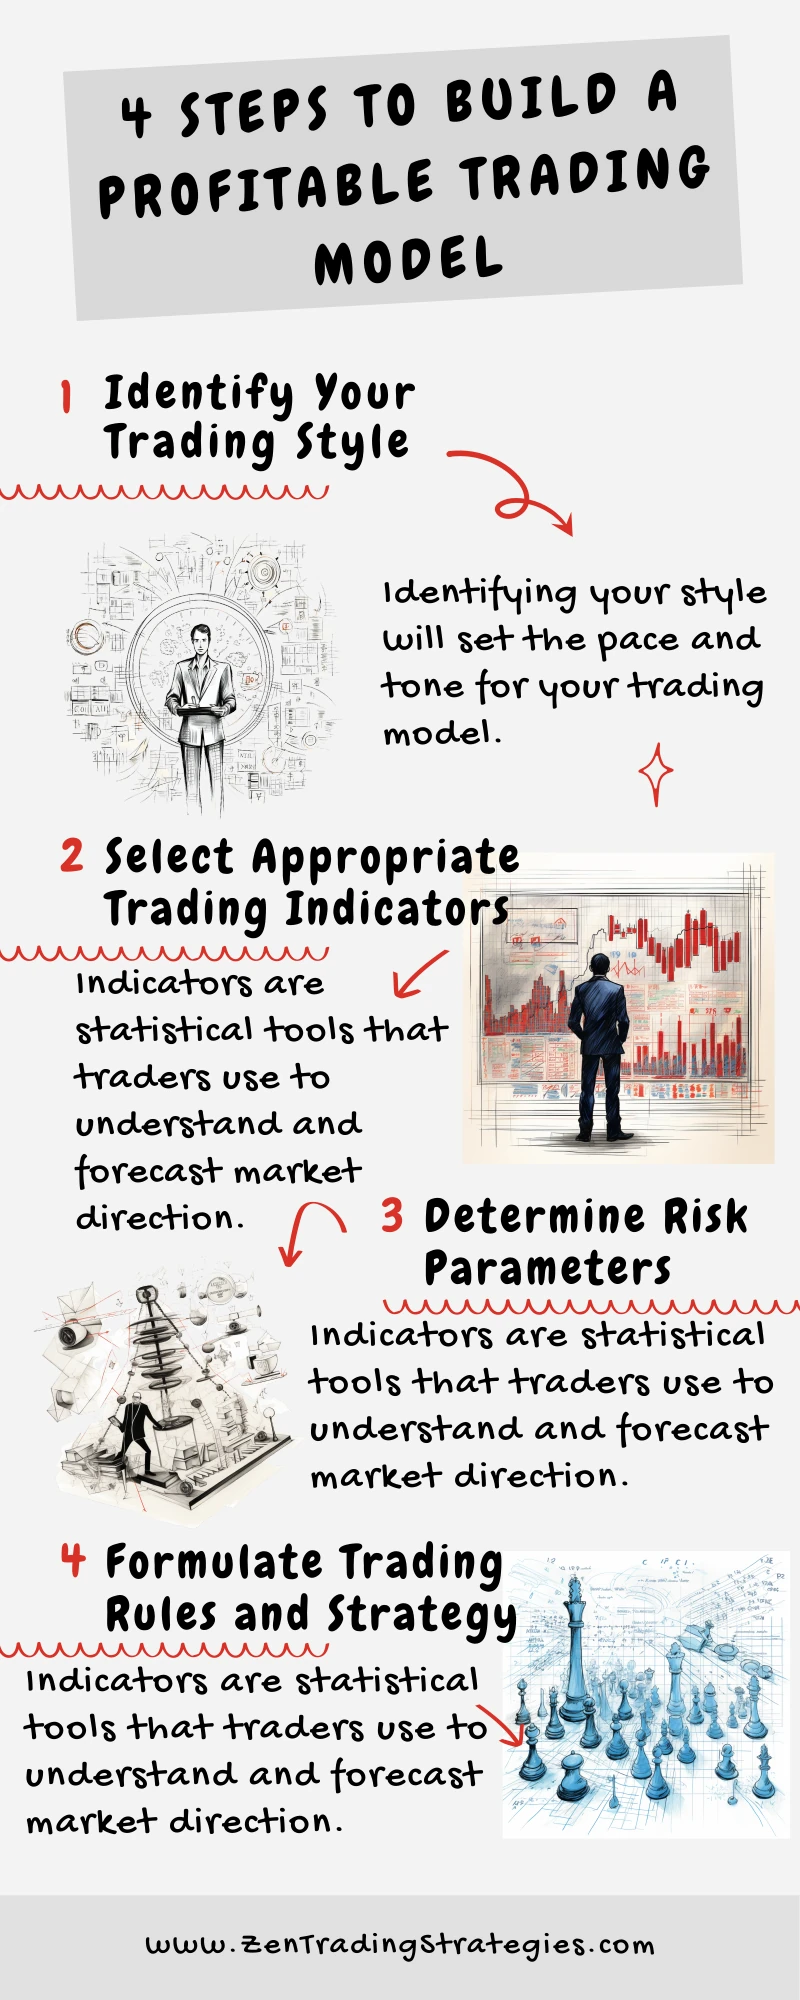 4 Steps to Building a Profitable Trading Model